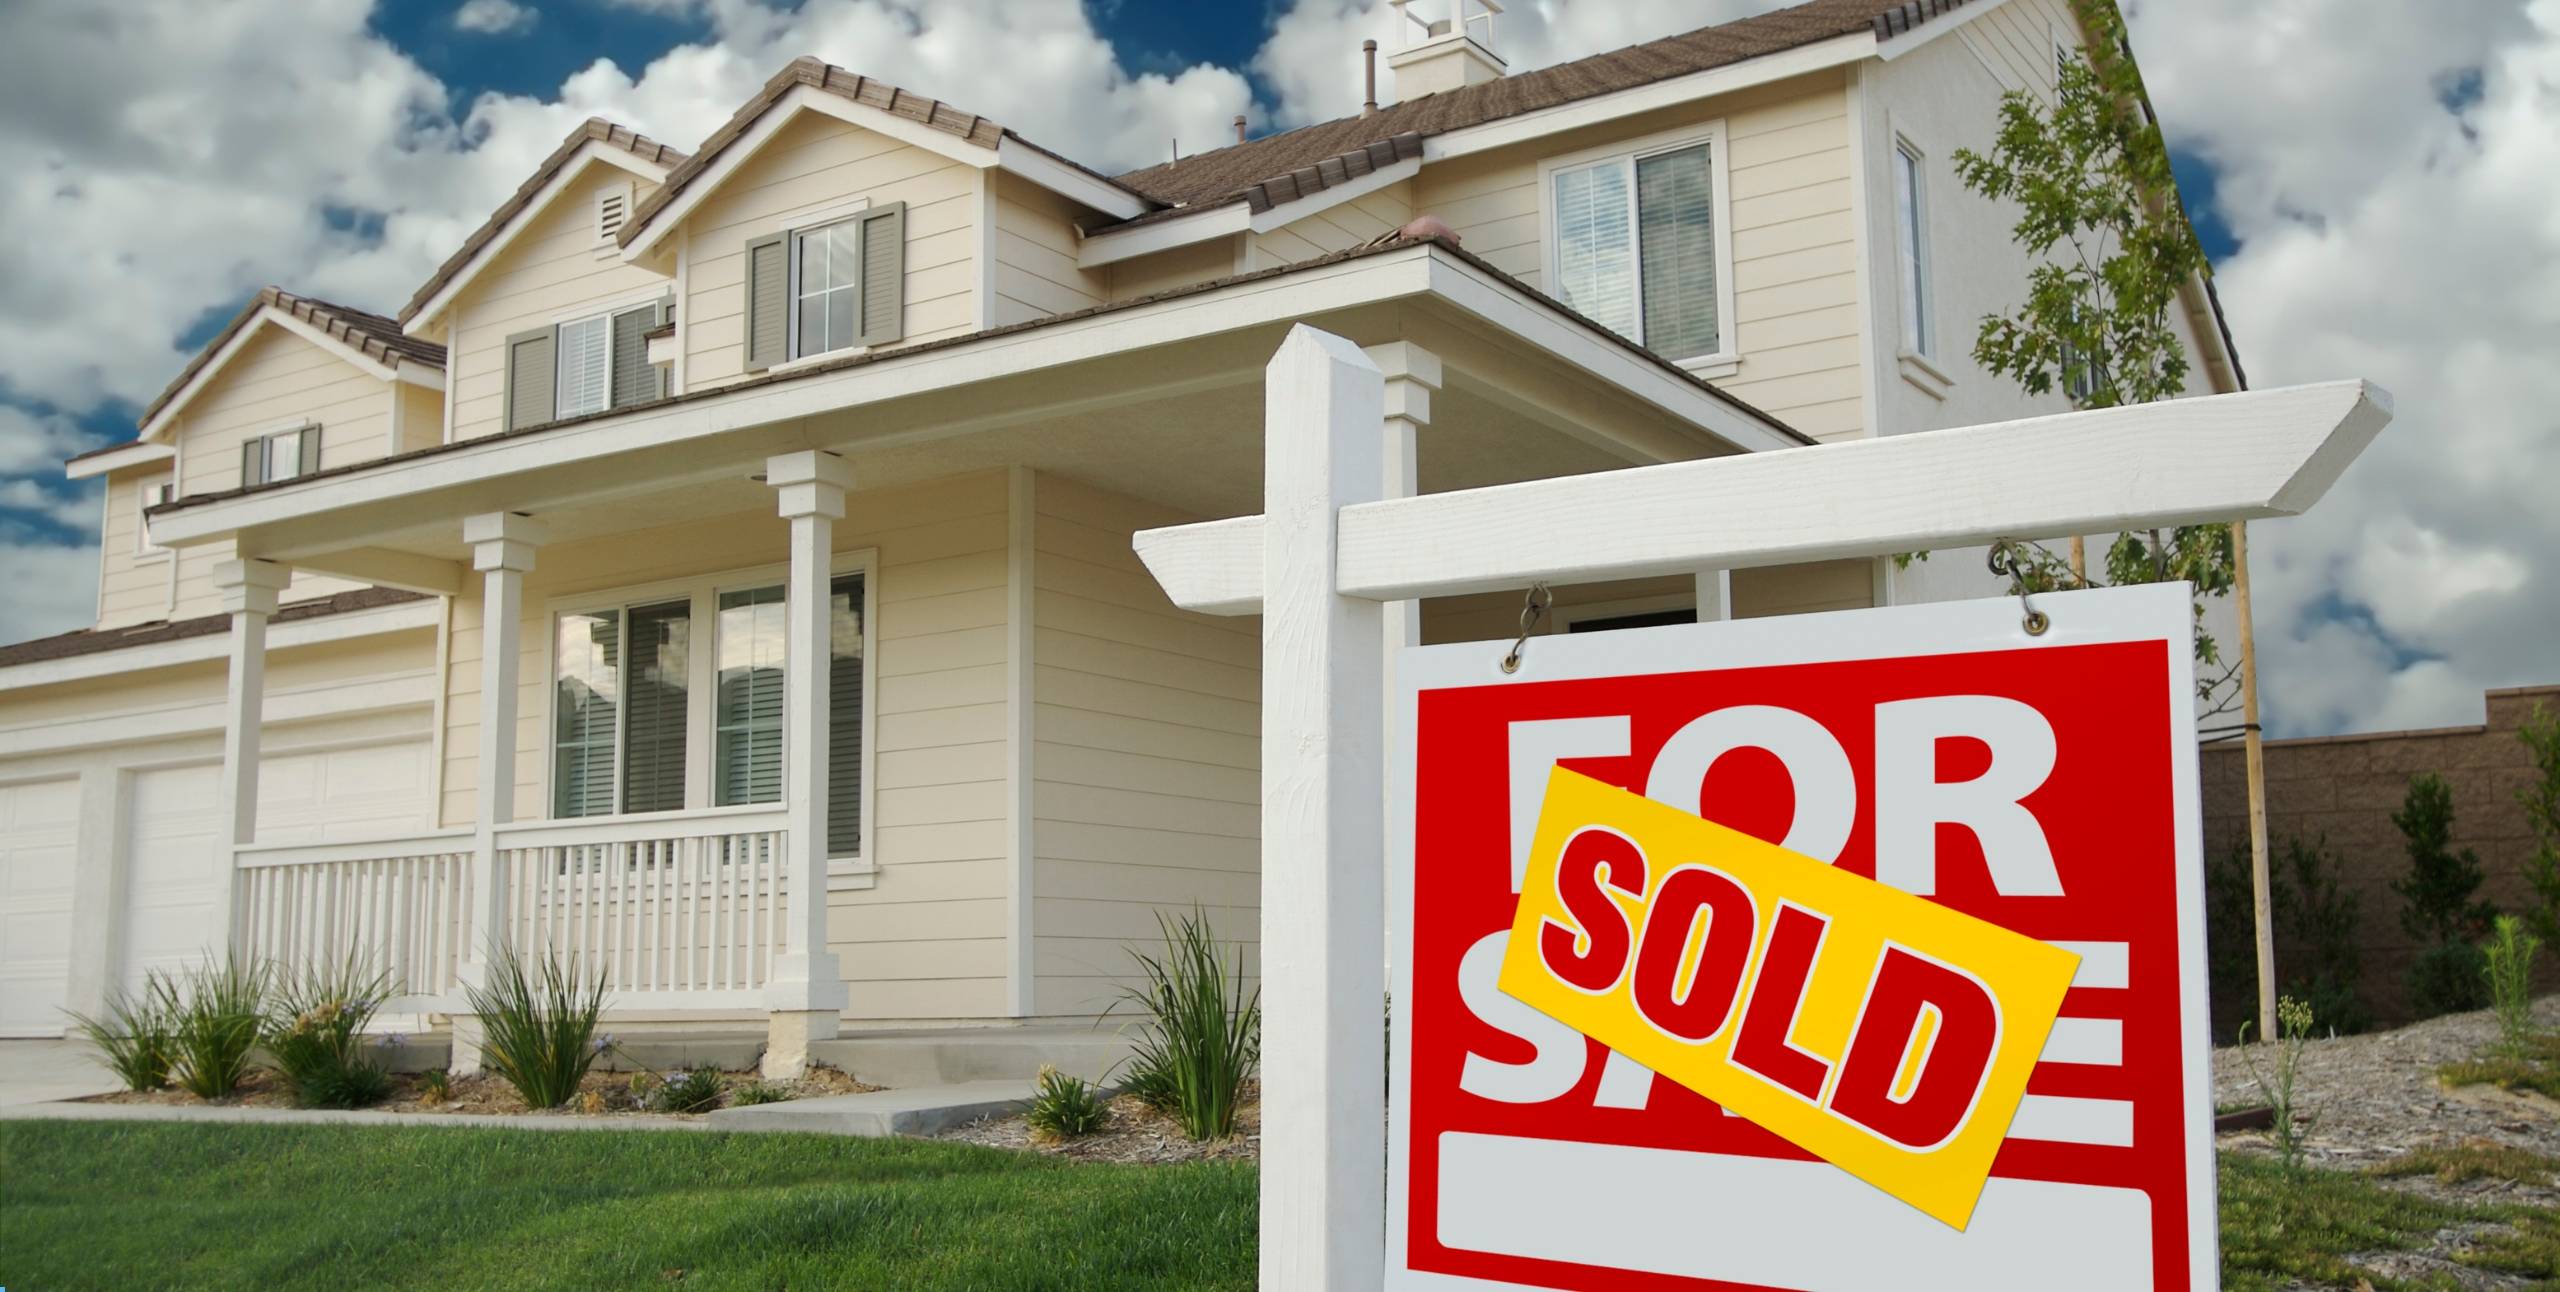 Home Prices Have Increased by Almost 50% Since 2020—How Should You Approach Deals Now?